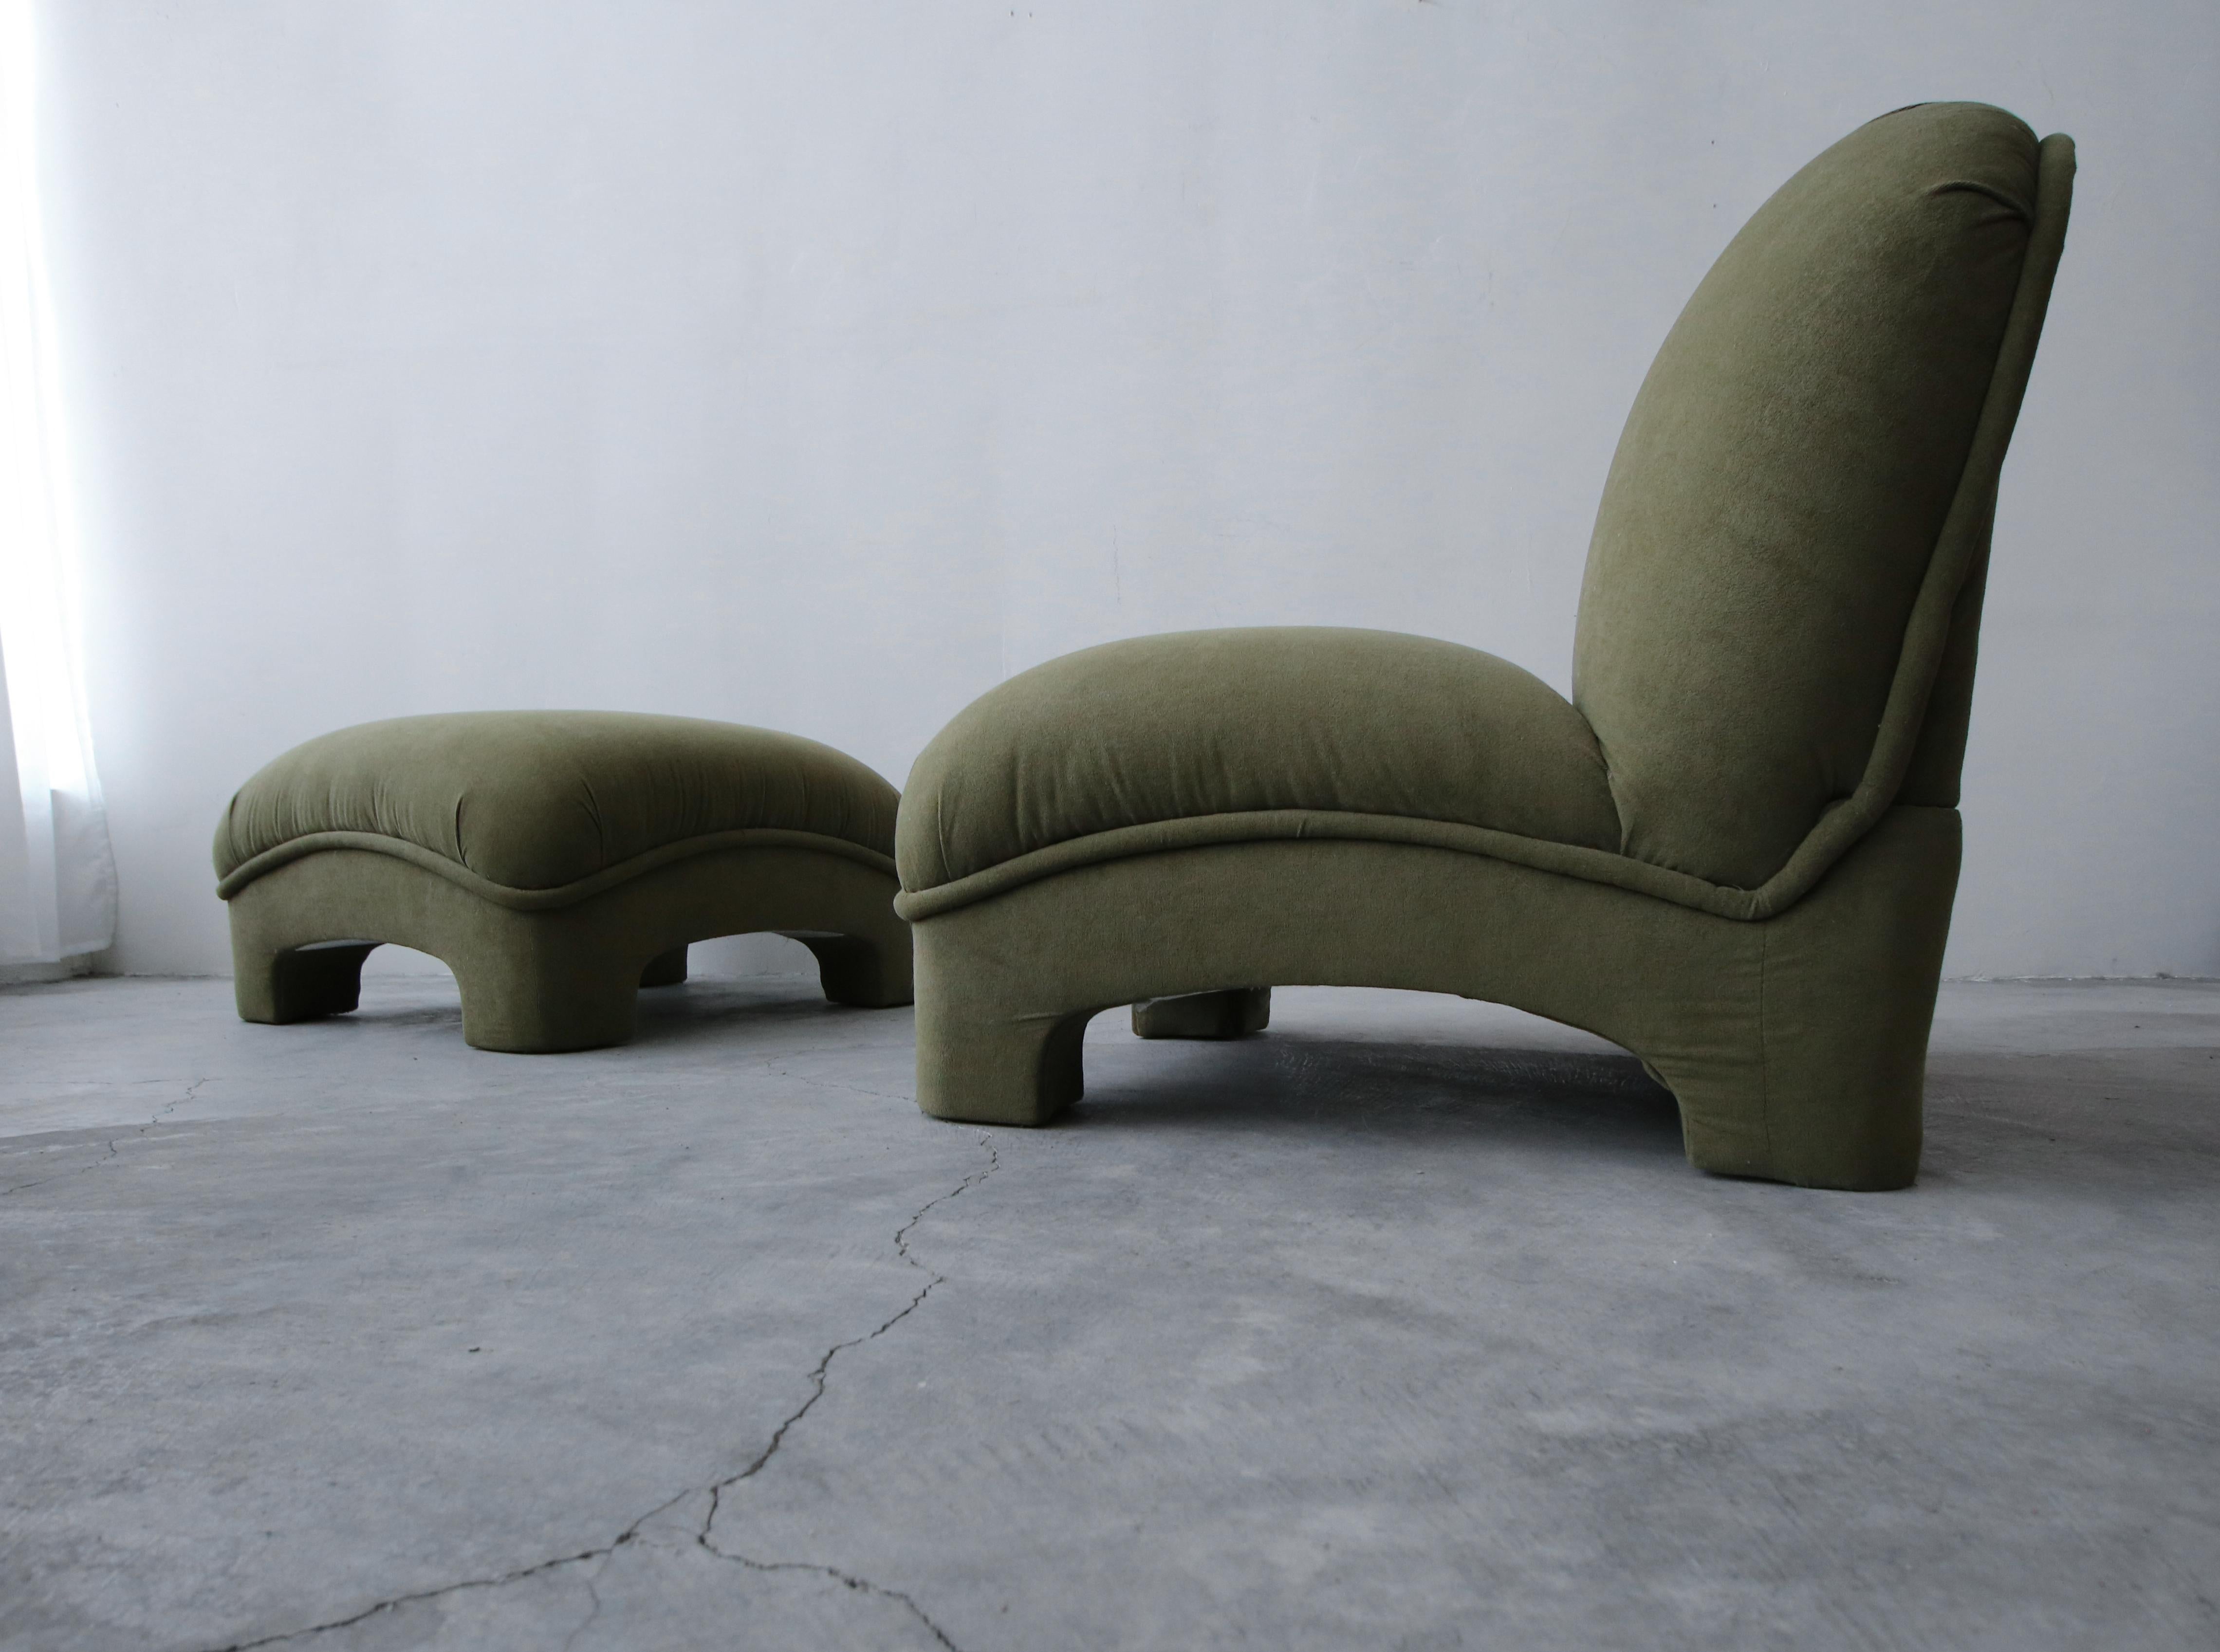 Incredible and large, Postmodern slipper chair with ottoman. This set has lines and curves truly worth coveting.

Kept as found. The pieces are comfortable and structurally sound. Fabric is in overall great condition, could be used as is, but